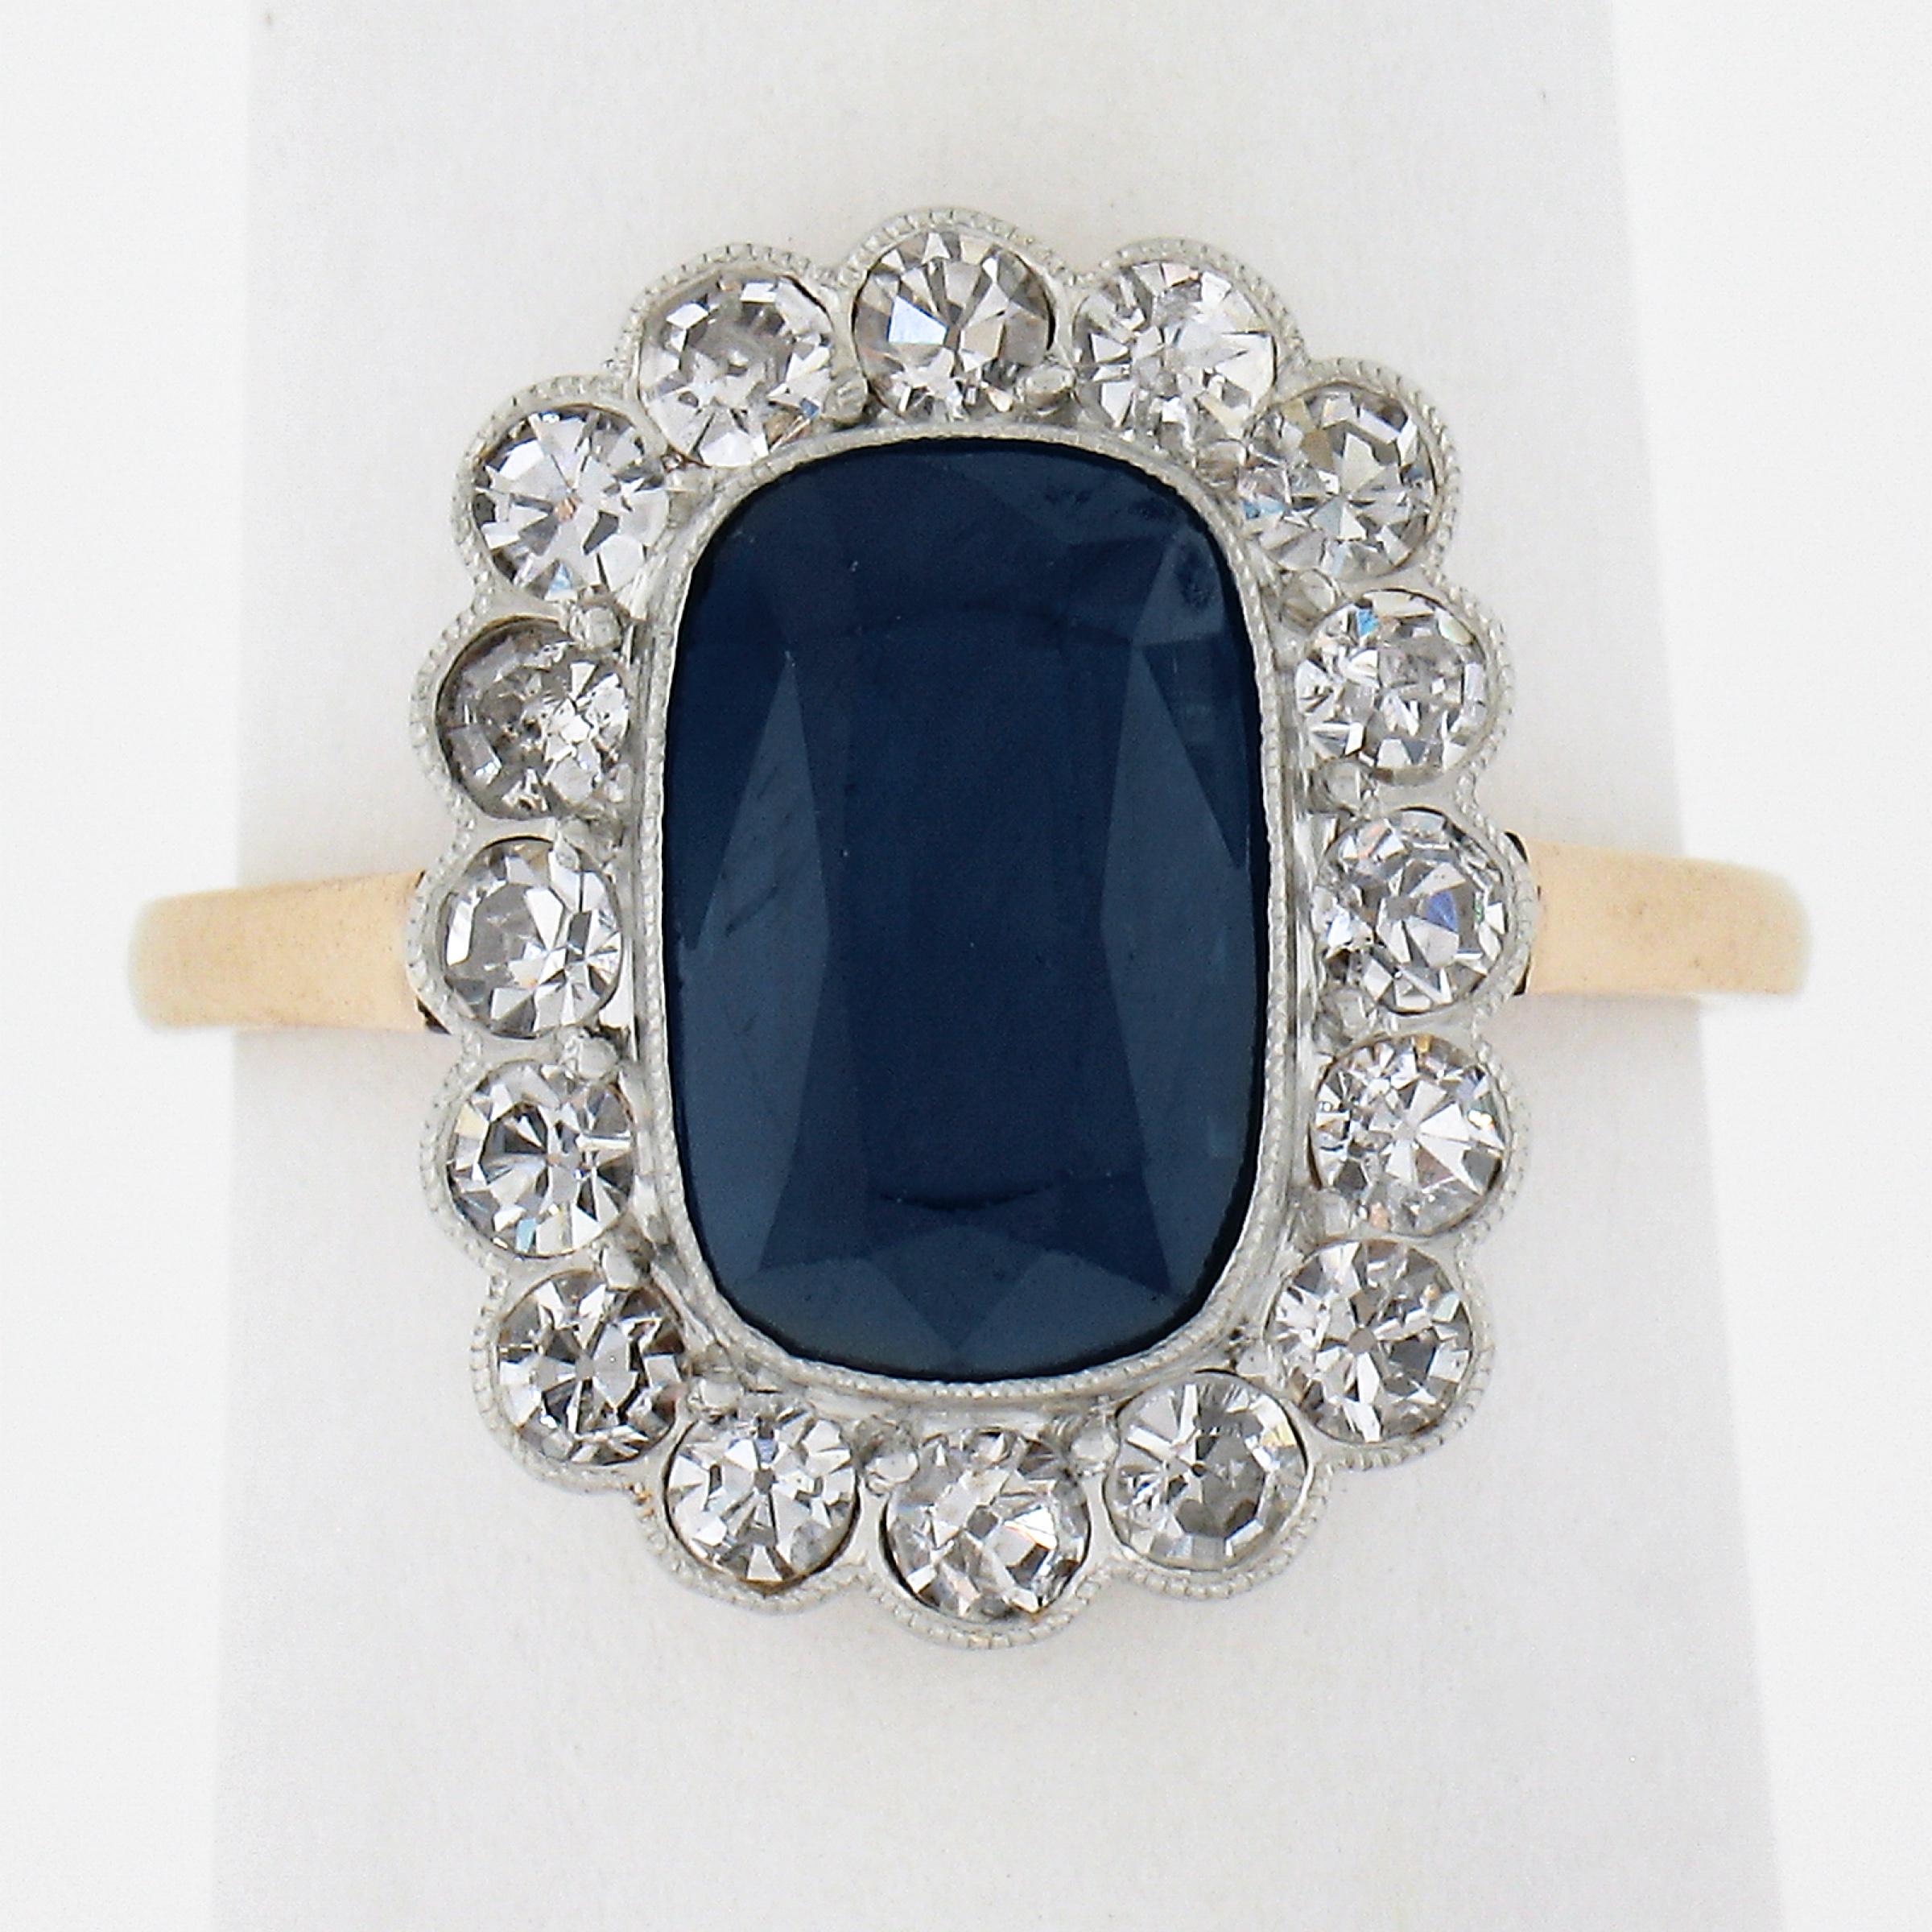 --Stone(s):--
(1) Natural Genuine Sapphire - Old Cushion Cut - Milgrain Bezel Set - Dark Blue Color - 3ct (approx. based on the certification)
** See Certification Details Below For More Info **
(16) Natural Genuine Diamonds - Old Single Cut - Half